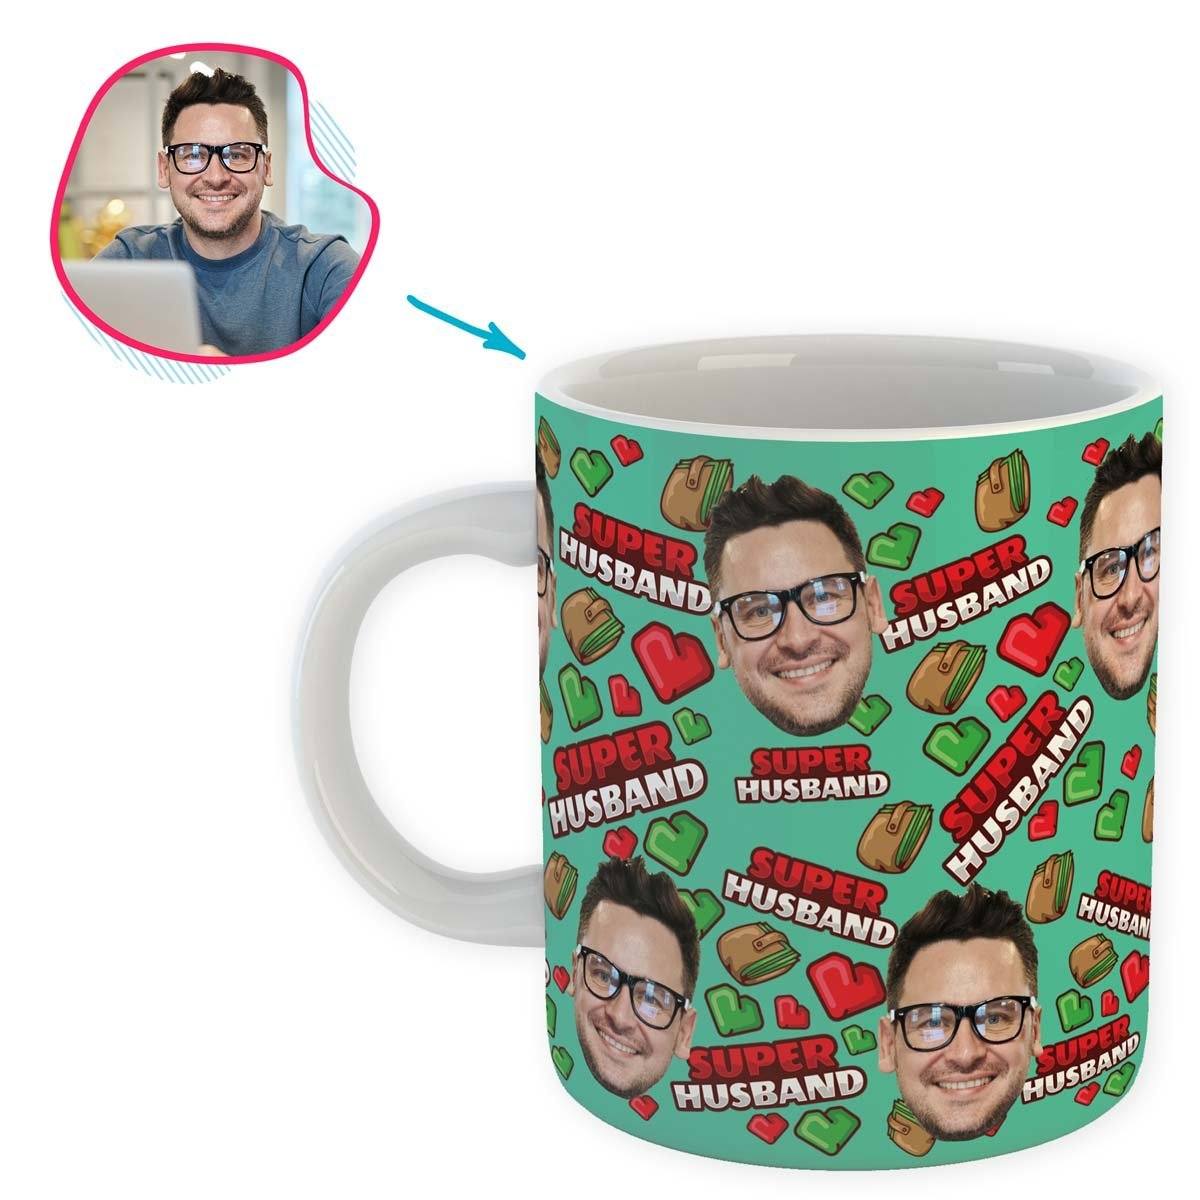 Mint Husband personalized mug with photo of face printed on it